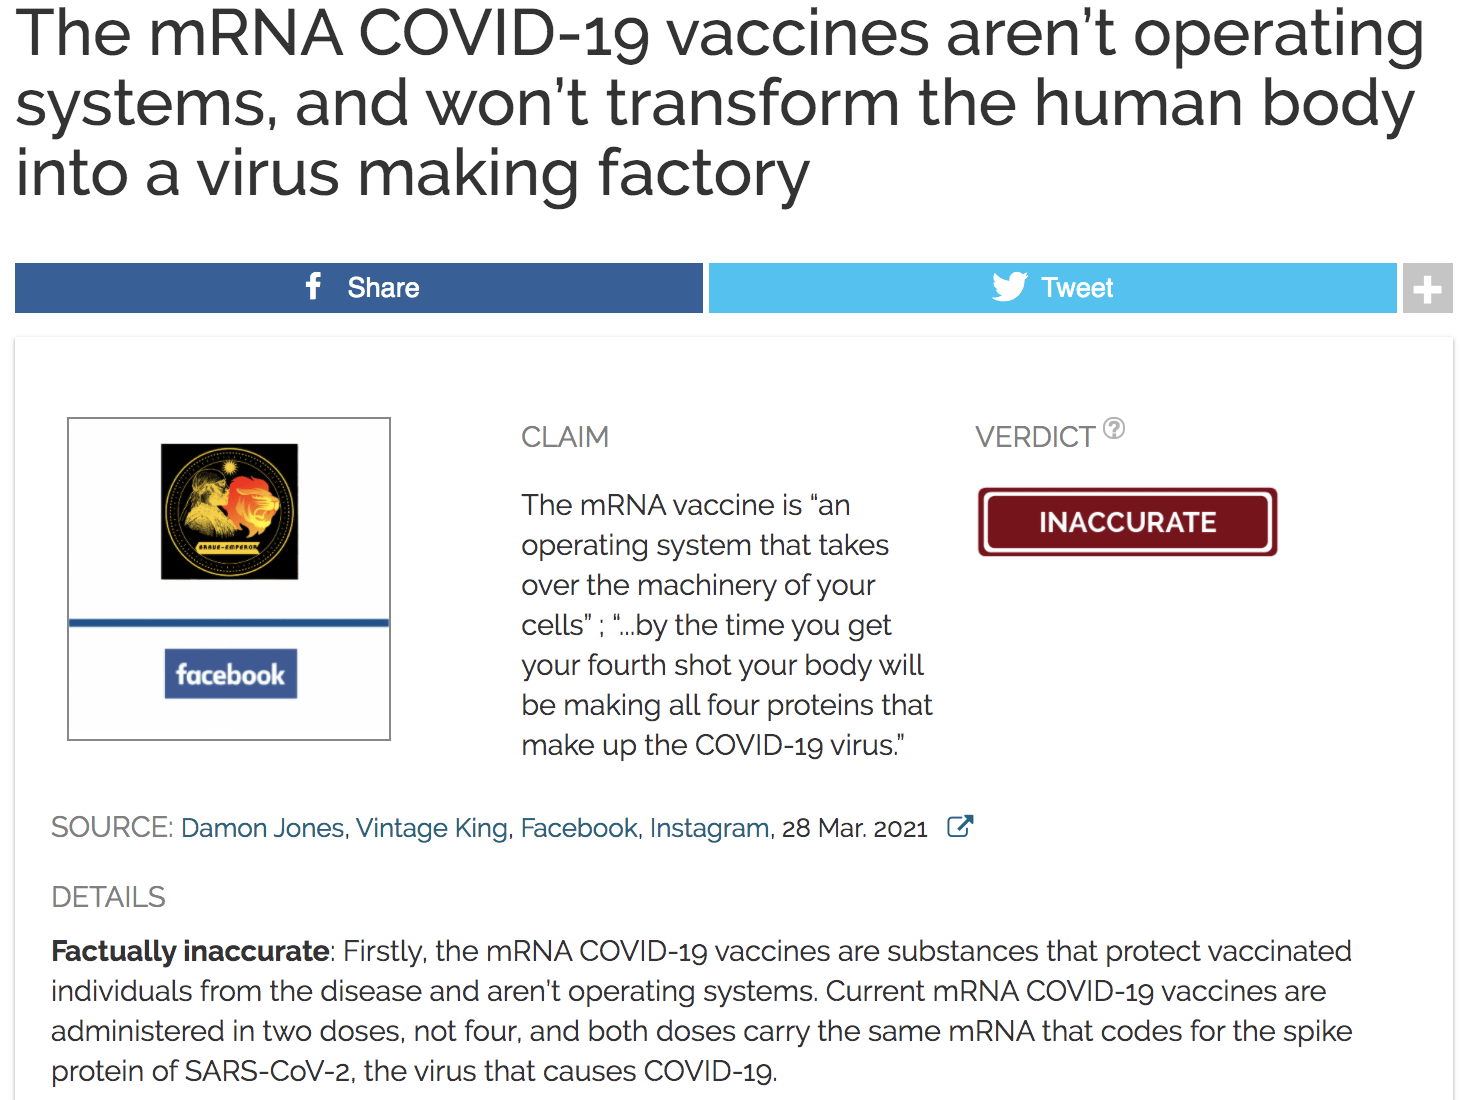 The mRNA COVID-19 vaccines are not operating systems, and will not turn the human body into a virus factory